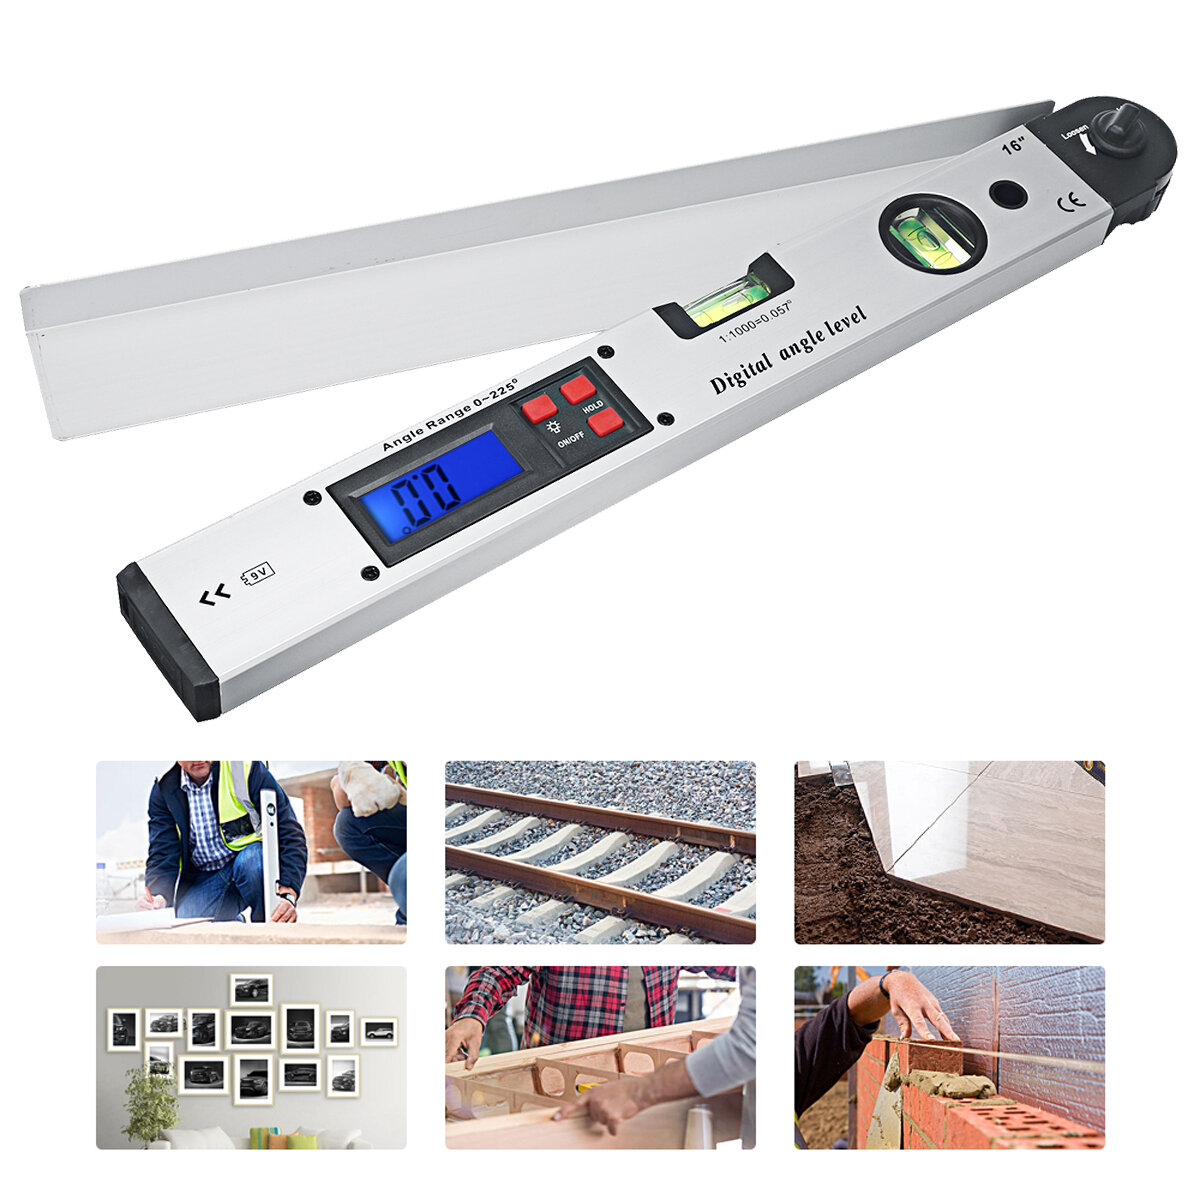 250/400mm Digital Angle Level Meter LCD Display 0-225 Degree for Measuring Roof Angles Fitting Up Windows or Doors Align